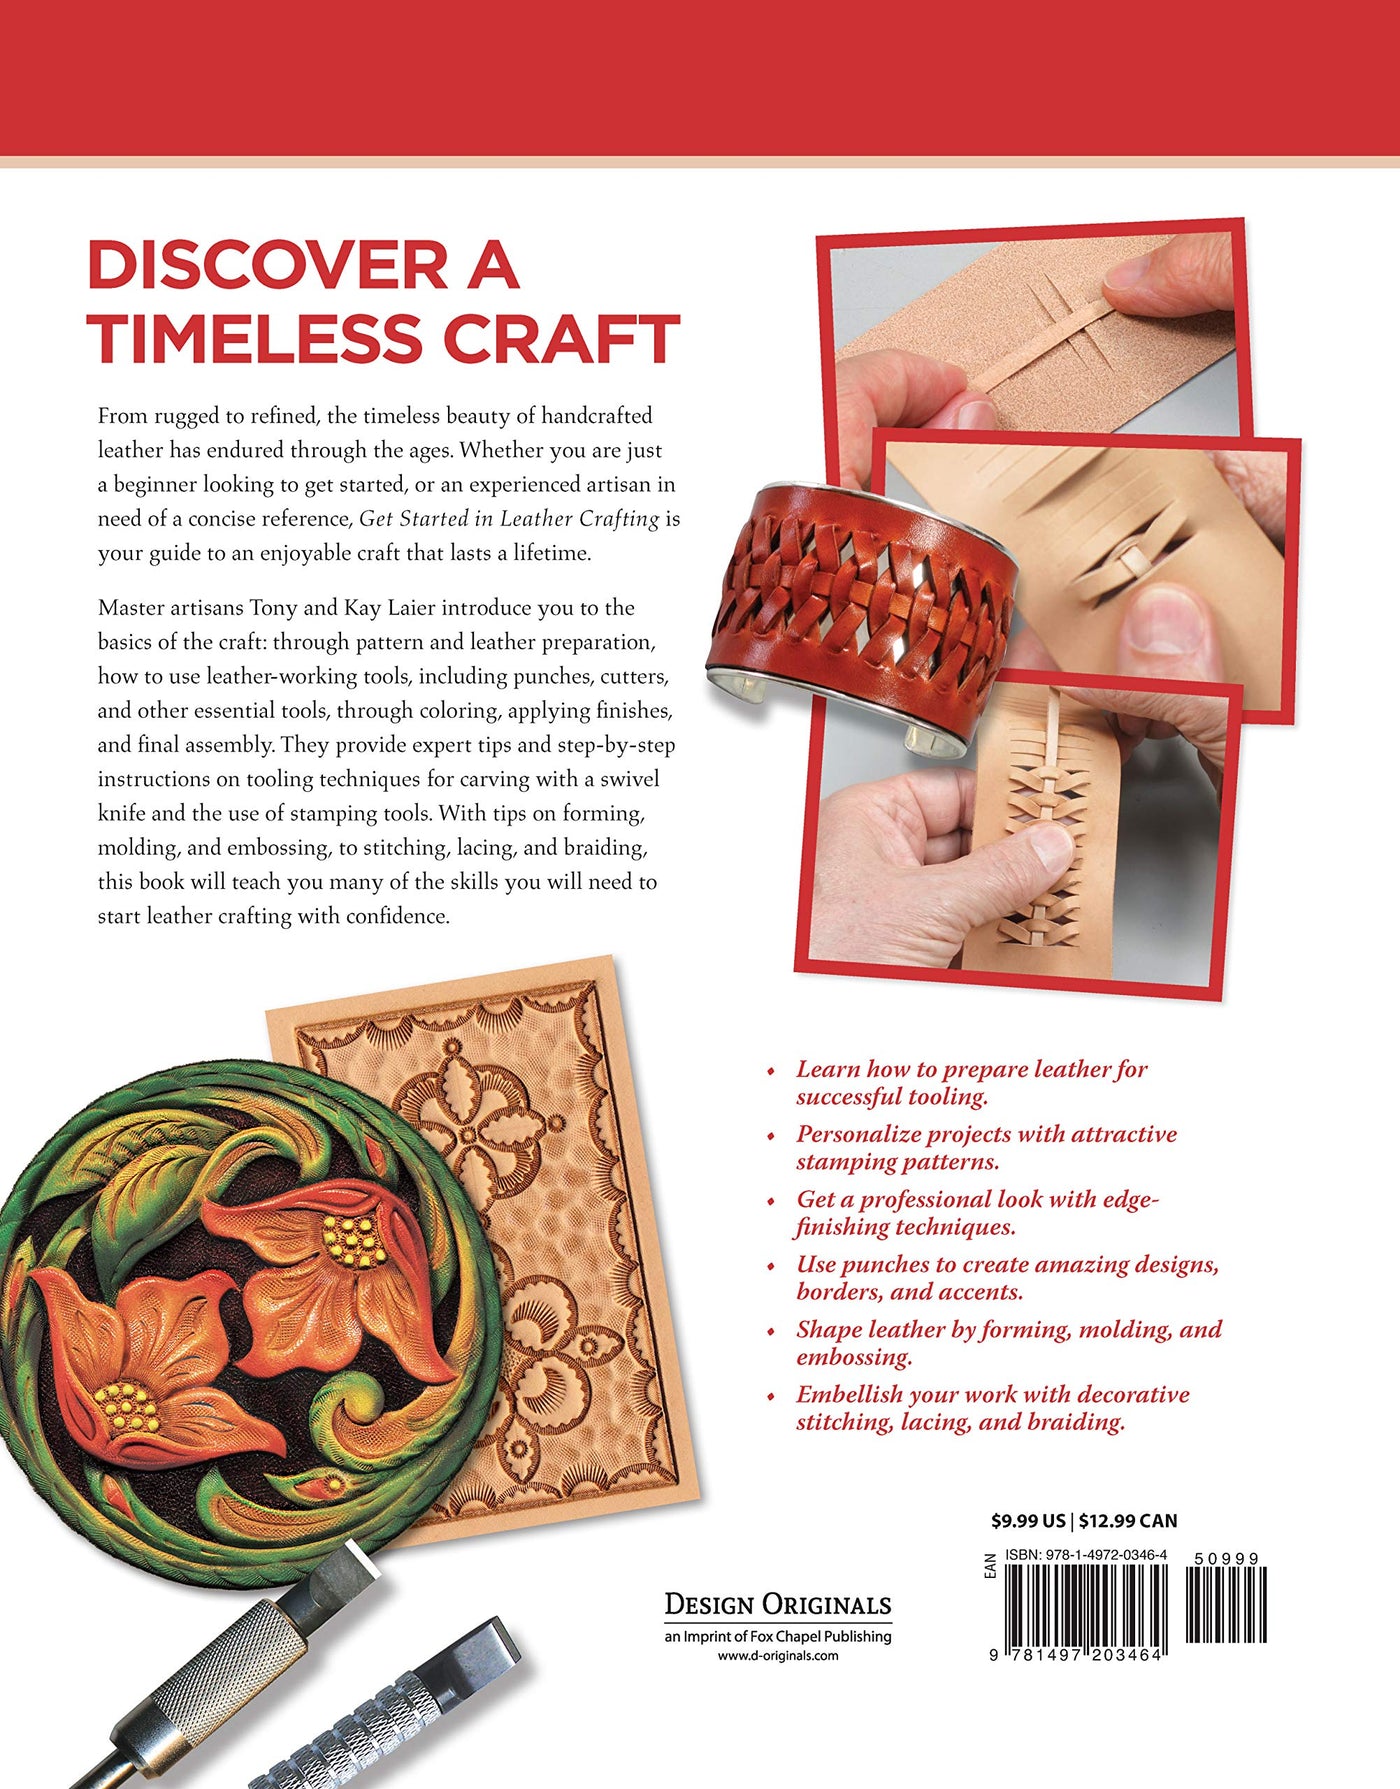 Get Started in Leather Crafting: Step-by-Step Techniques and Tips for Crafting Success (Spiral Bound)